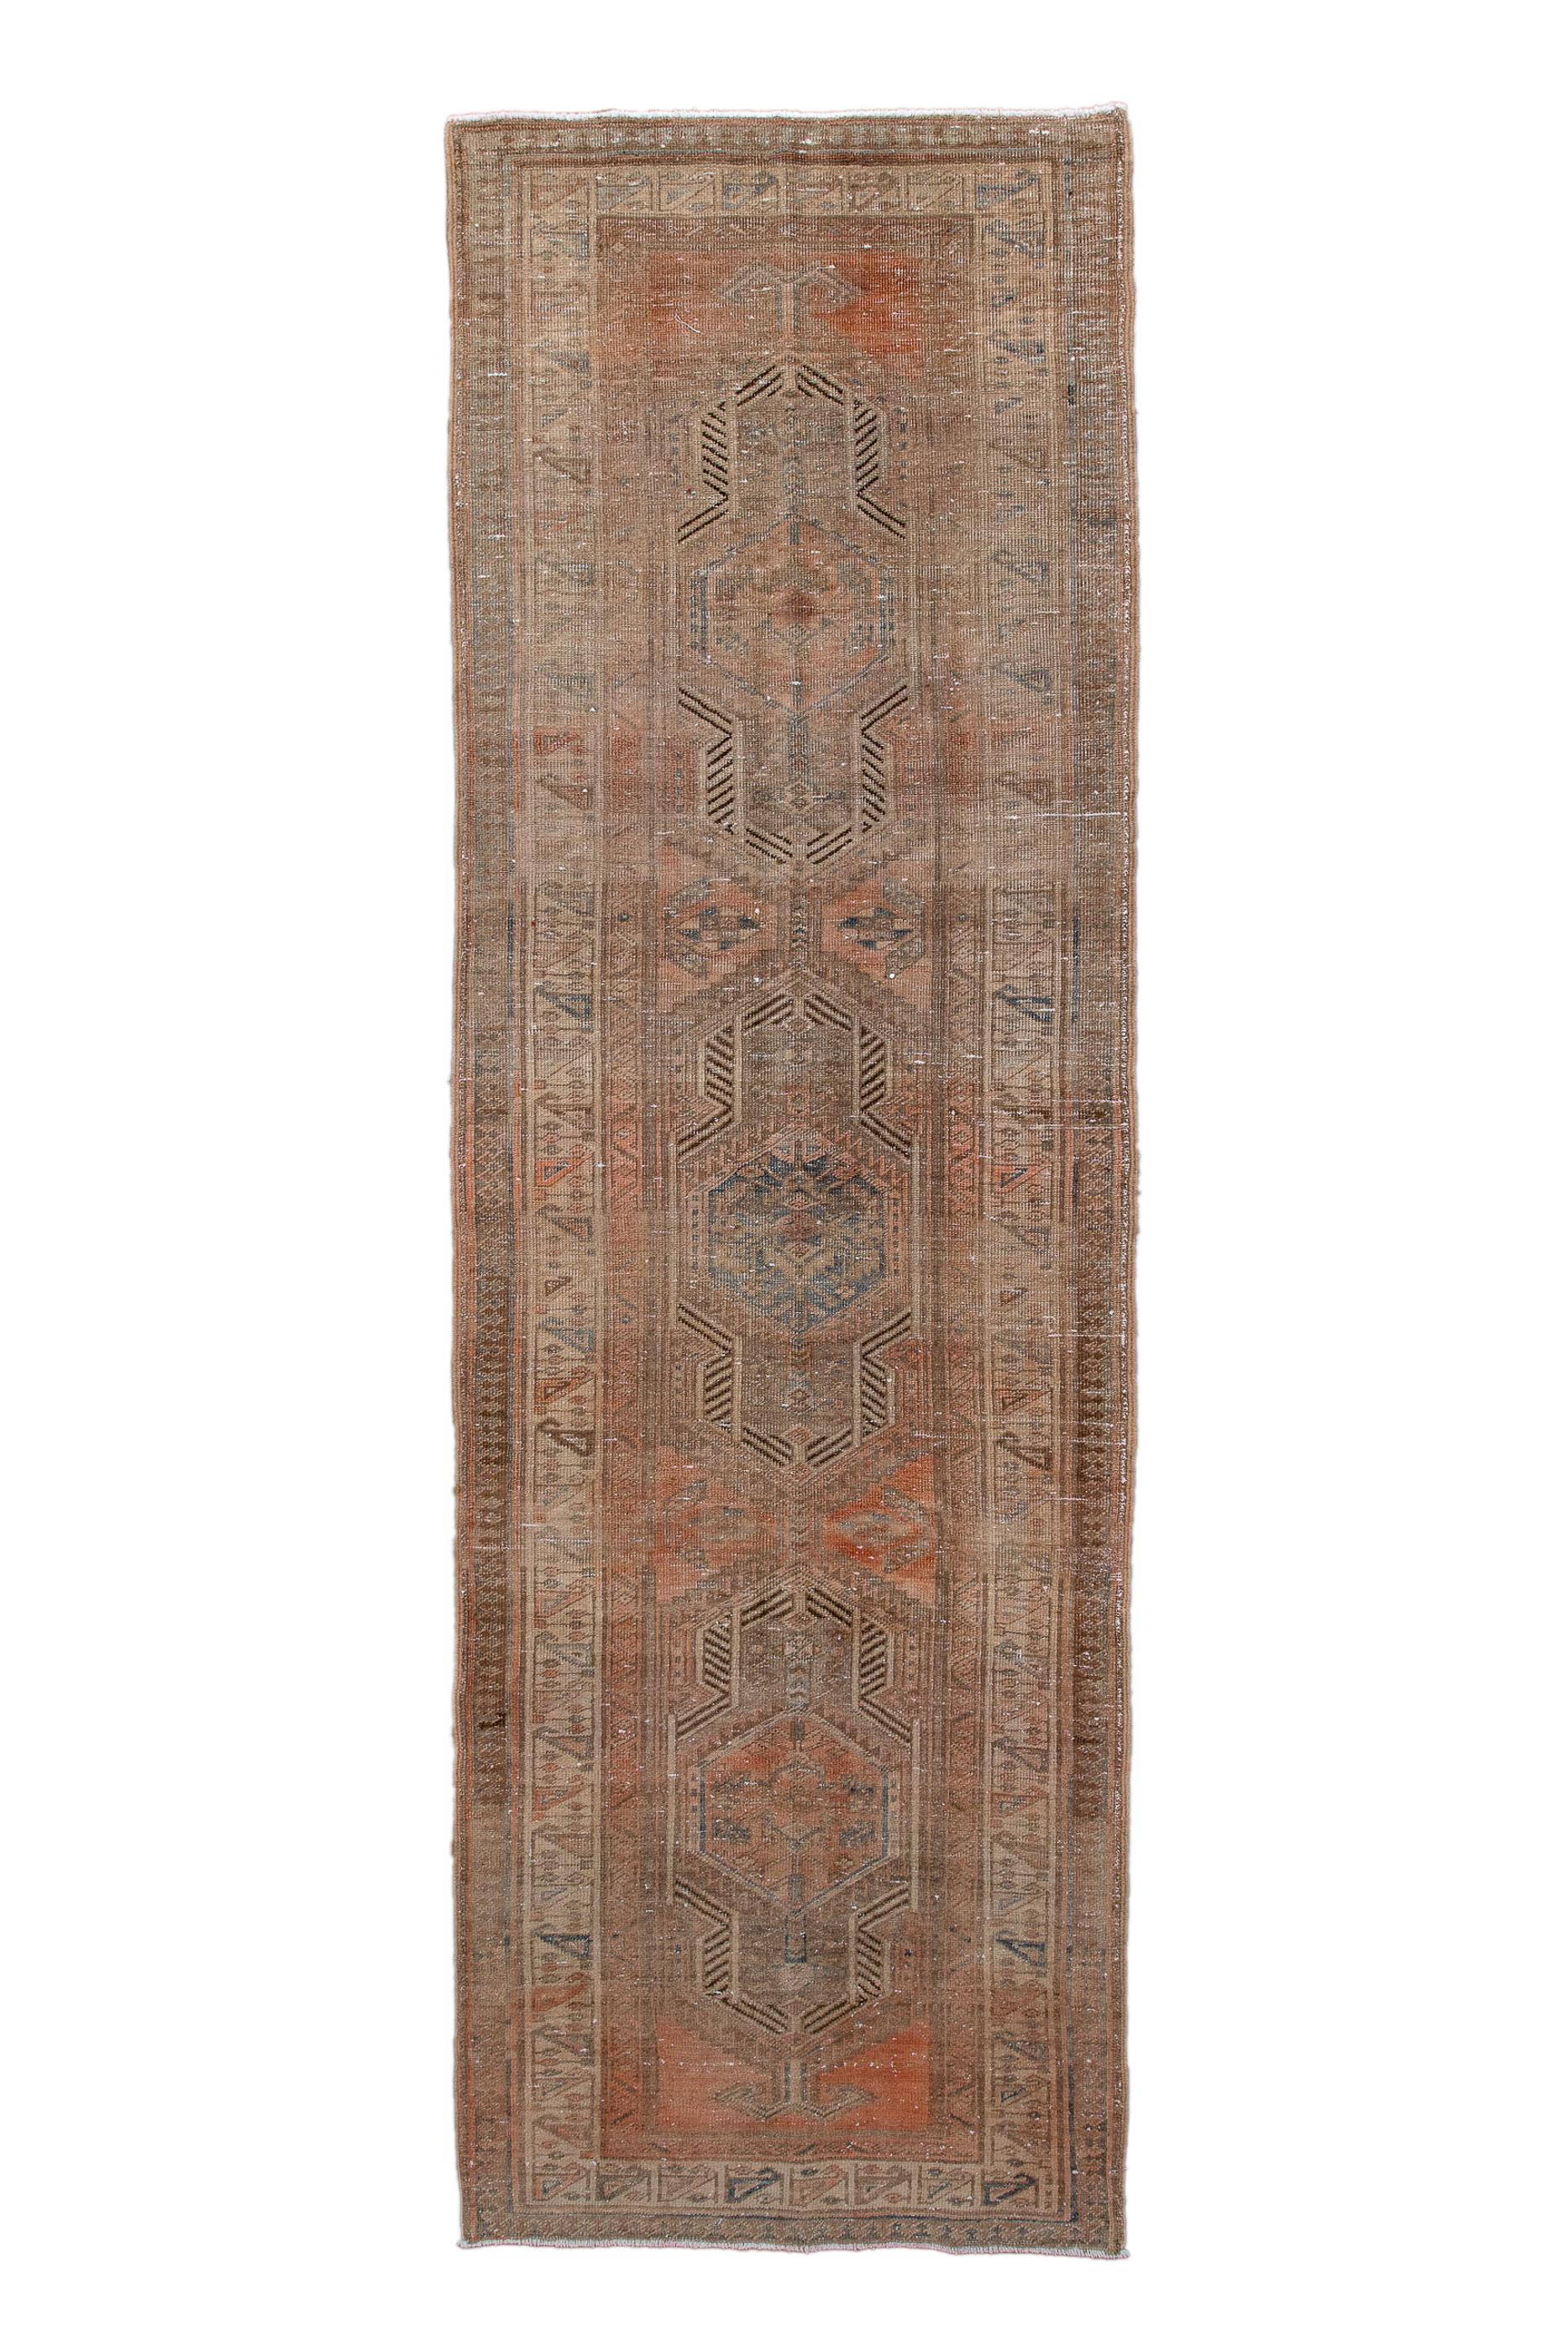 Runner or long rug? The camel-tone ground hosts  three indented cartouches with prominent comb decorations, with secondary trapezoidal side fillers.  Eggshell border with unusual triangular reversing botehs and straight line sprigs.  Moderate weave,